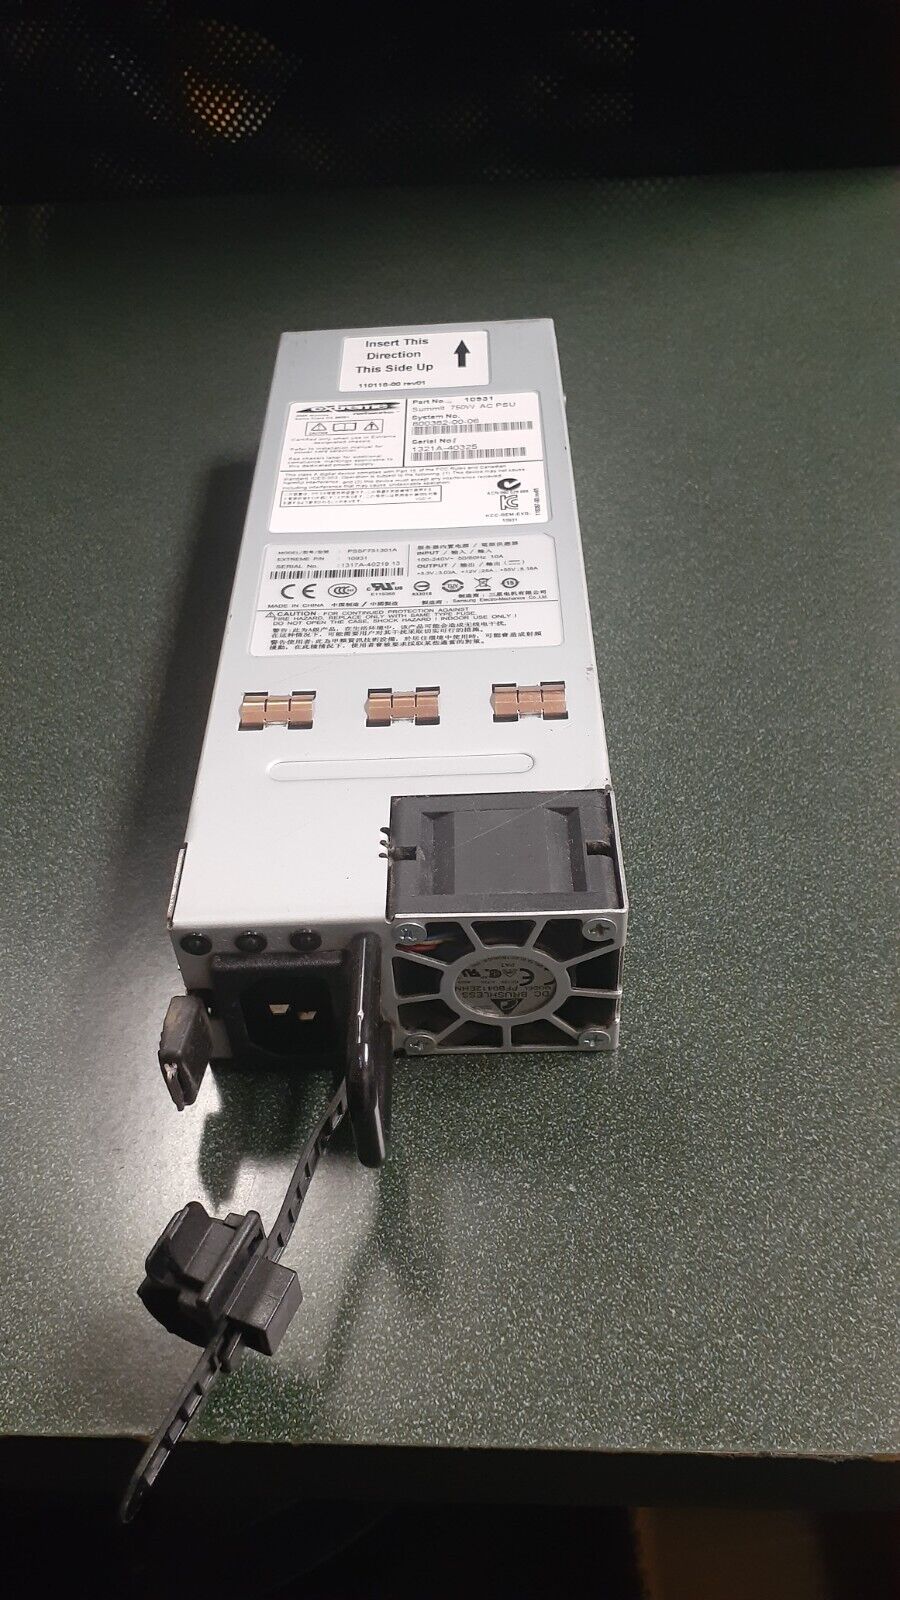 10931. Extreme Networks Summit X460 PoE AC PSU - Power supply - Used and Tested.